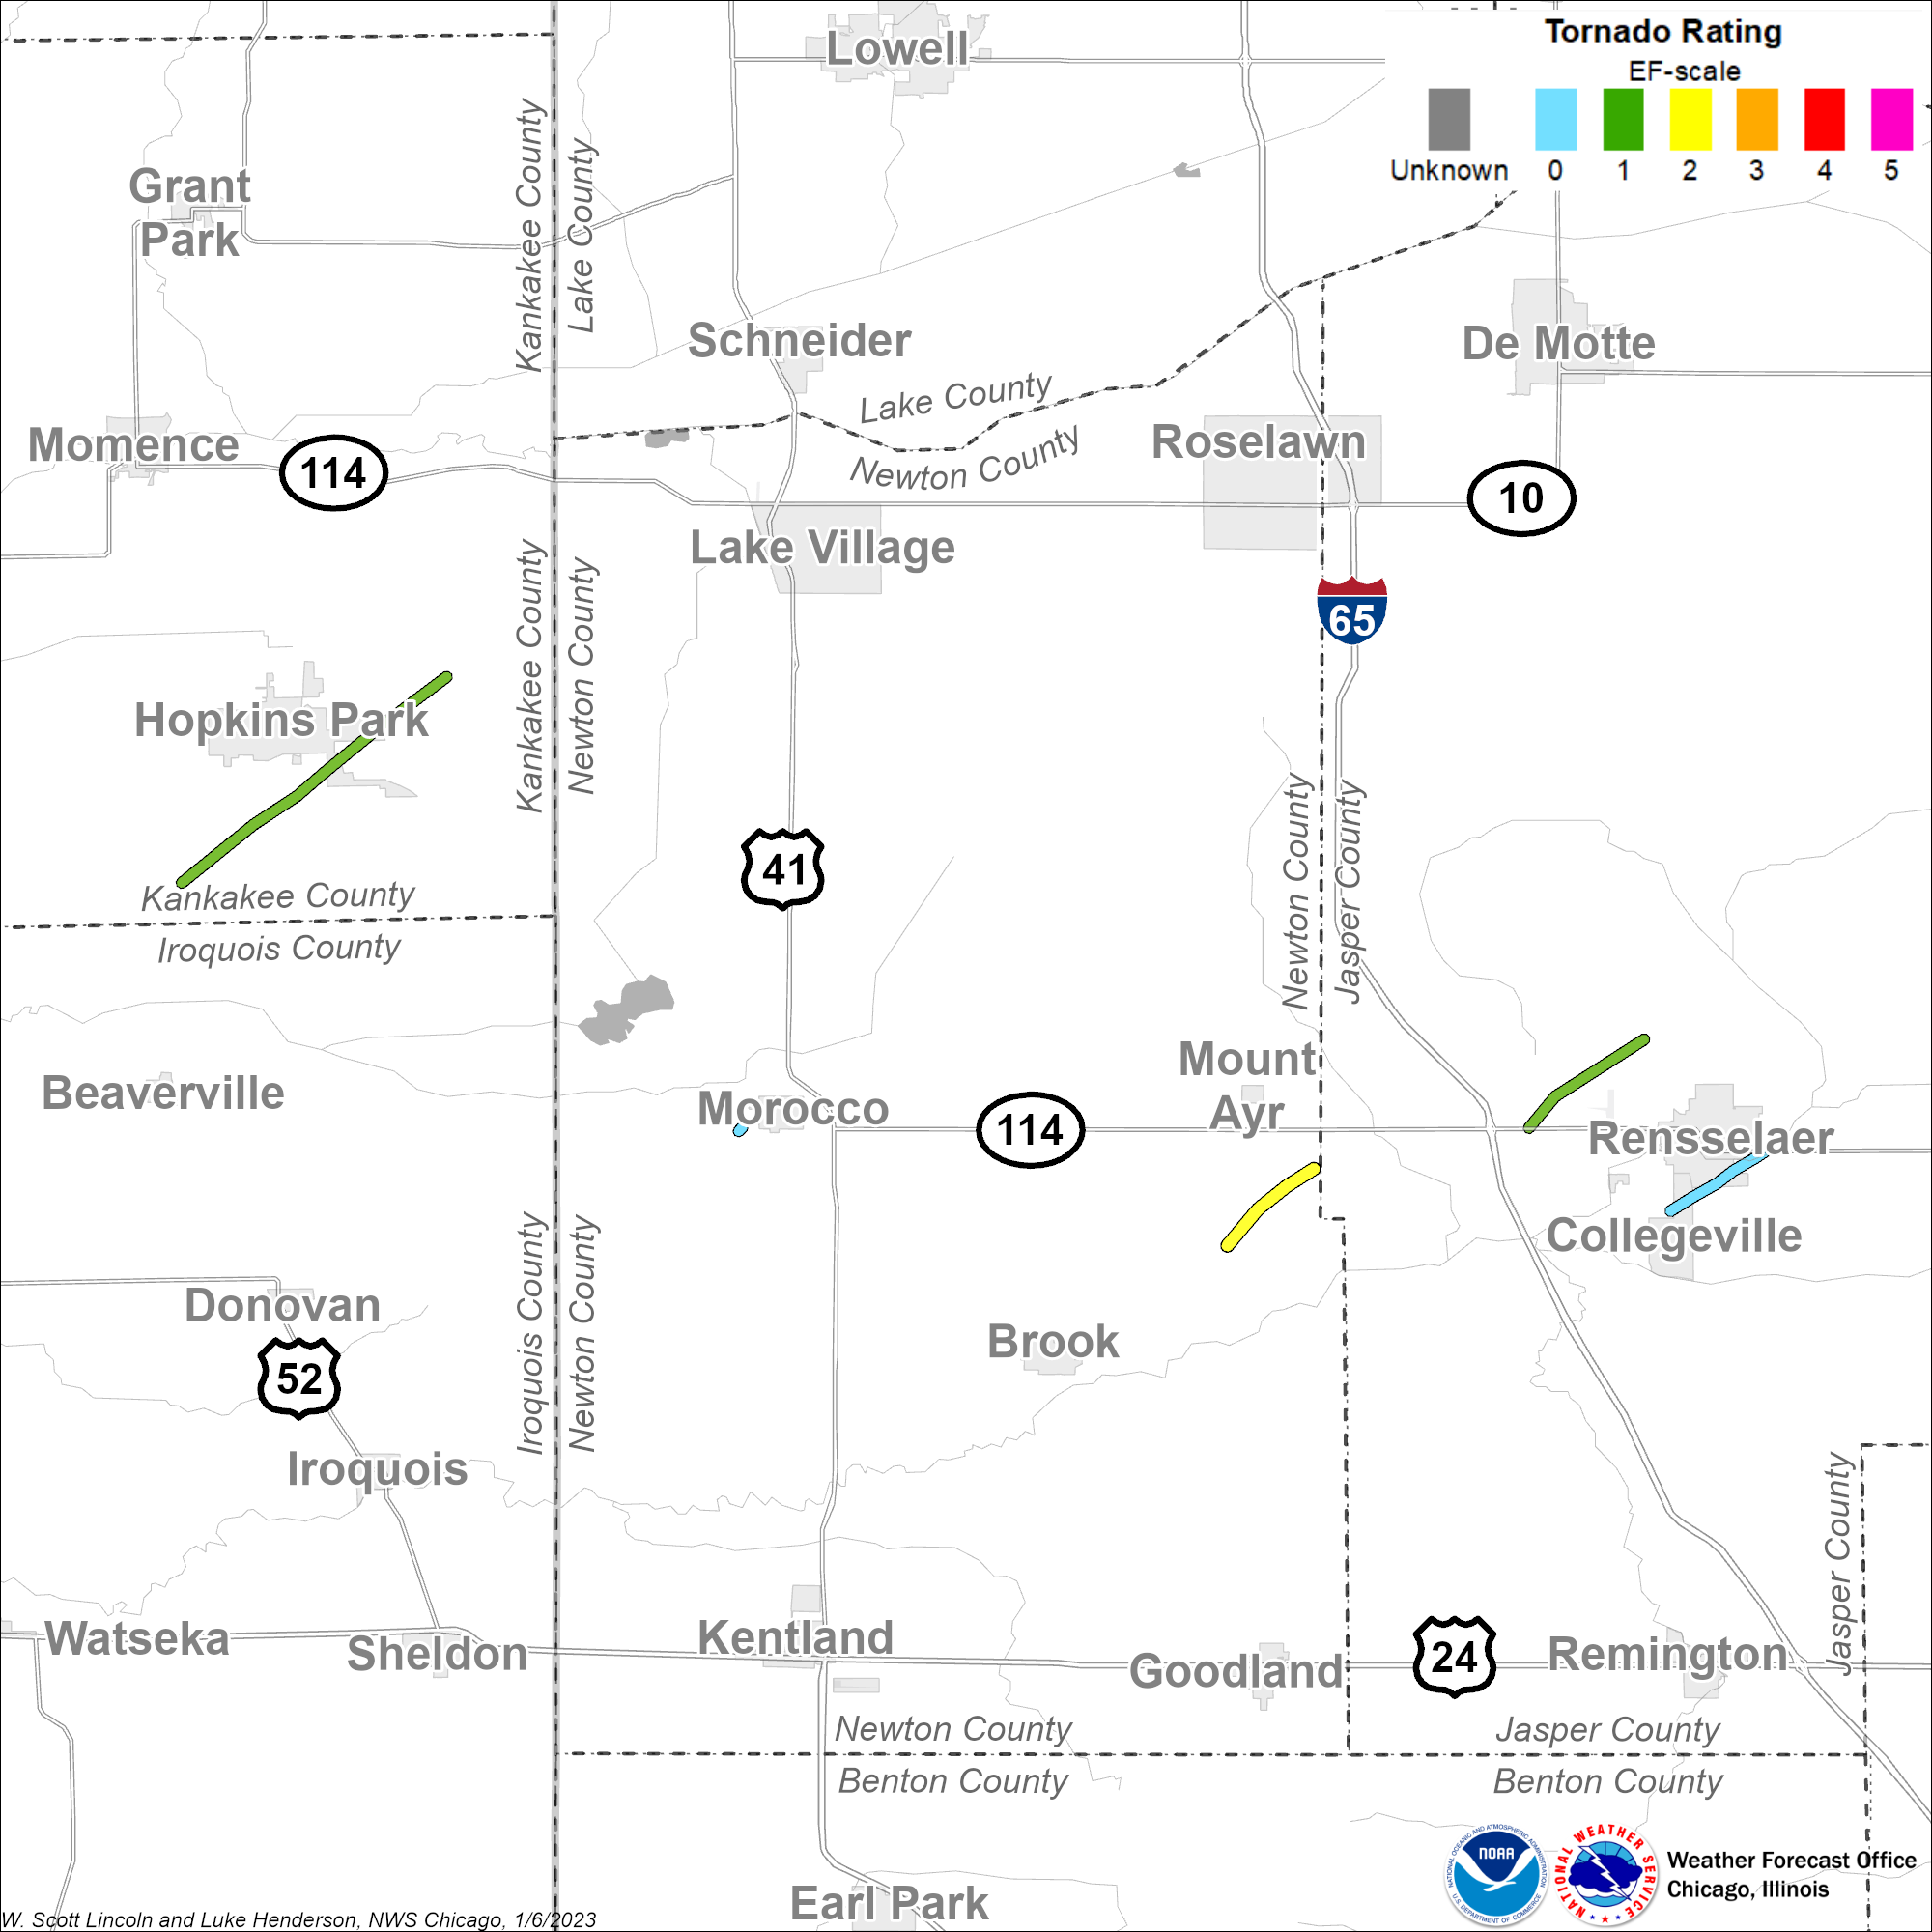 Map showing tornado tracks in northeast Illinois and northwest Indiana